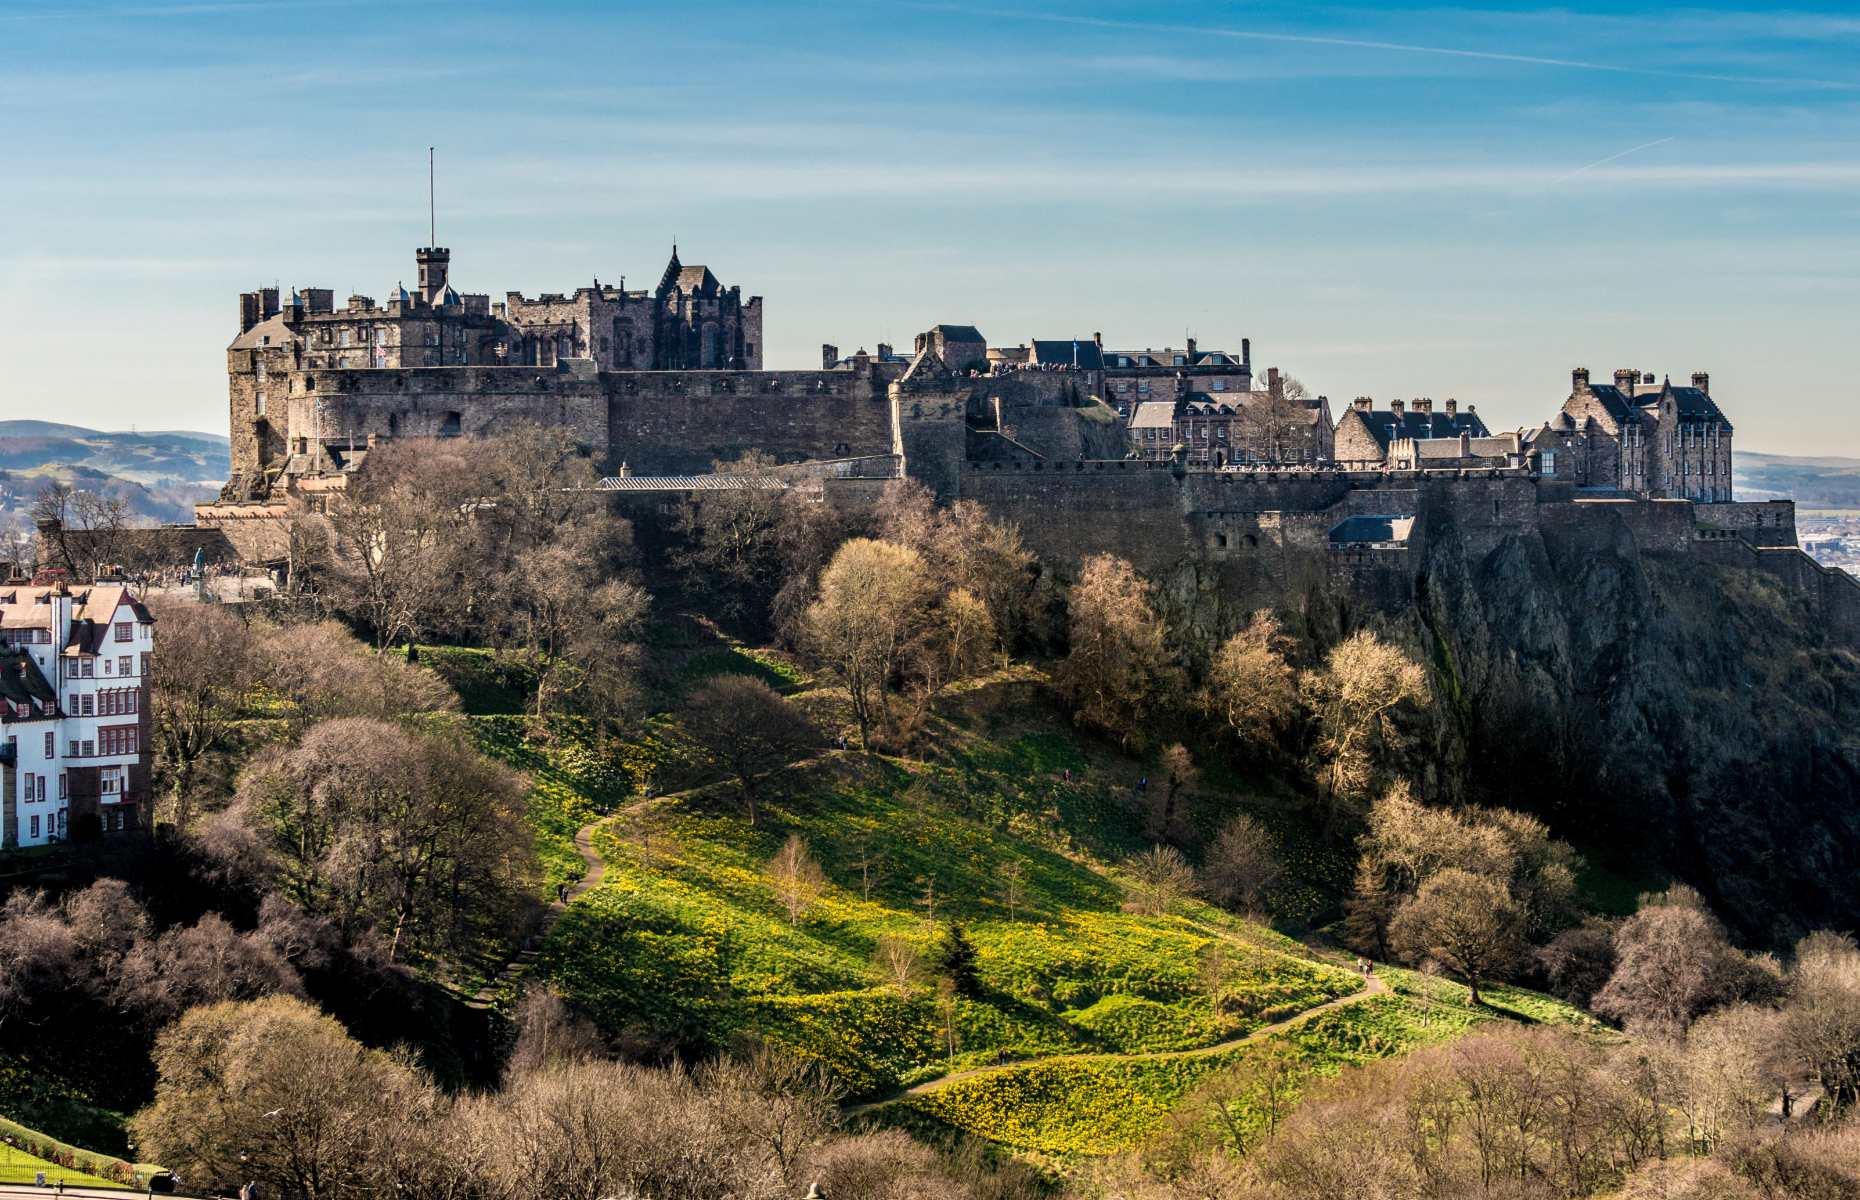 <p>Edinburgh Castle has watched over Scotland's <a href="https://www.loveexploring.com/guides/79636/explore-edinburgh-places-to-see-what-to-do-and-where-to-stay">capital city</a> from its lofty site on a rugged volcanic plug for centuries. Built during the 12th century by King David I, the son of Saint Margaret of Scotland, the fortress was the home of Scottish kings and queens until the union of the crowns in 1603. The castle’s St Margaret's Chapel was built by King David I in his mother’s honour and is the oldest building in Edinburgh. Soaring over the city’s urban sprawl on Castle Rock, the castle is one of the country’s most popular attractions.</p>  <p><strong><a href="https://www.loveexploring.com/gallerylist/67038/30-of-europes-most-beautiful-castles">Explore Europe’s most beautiful castles</a></strong></p>